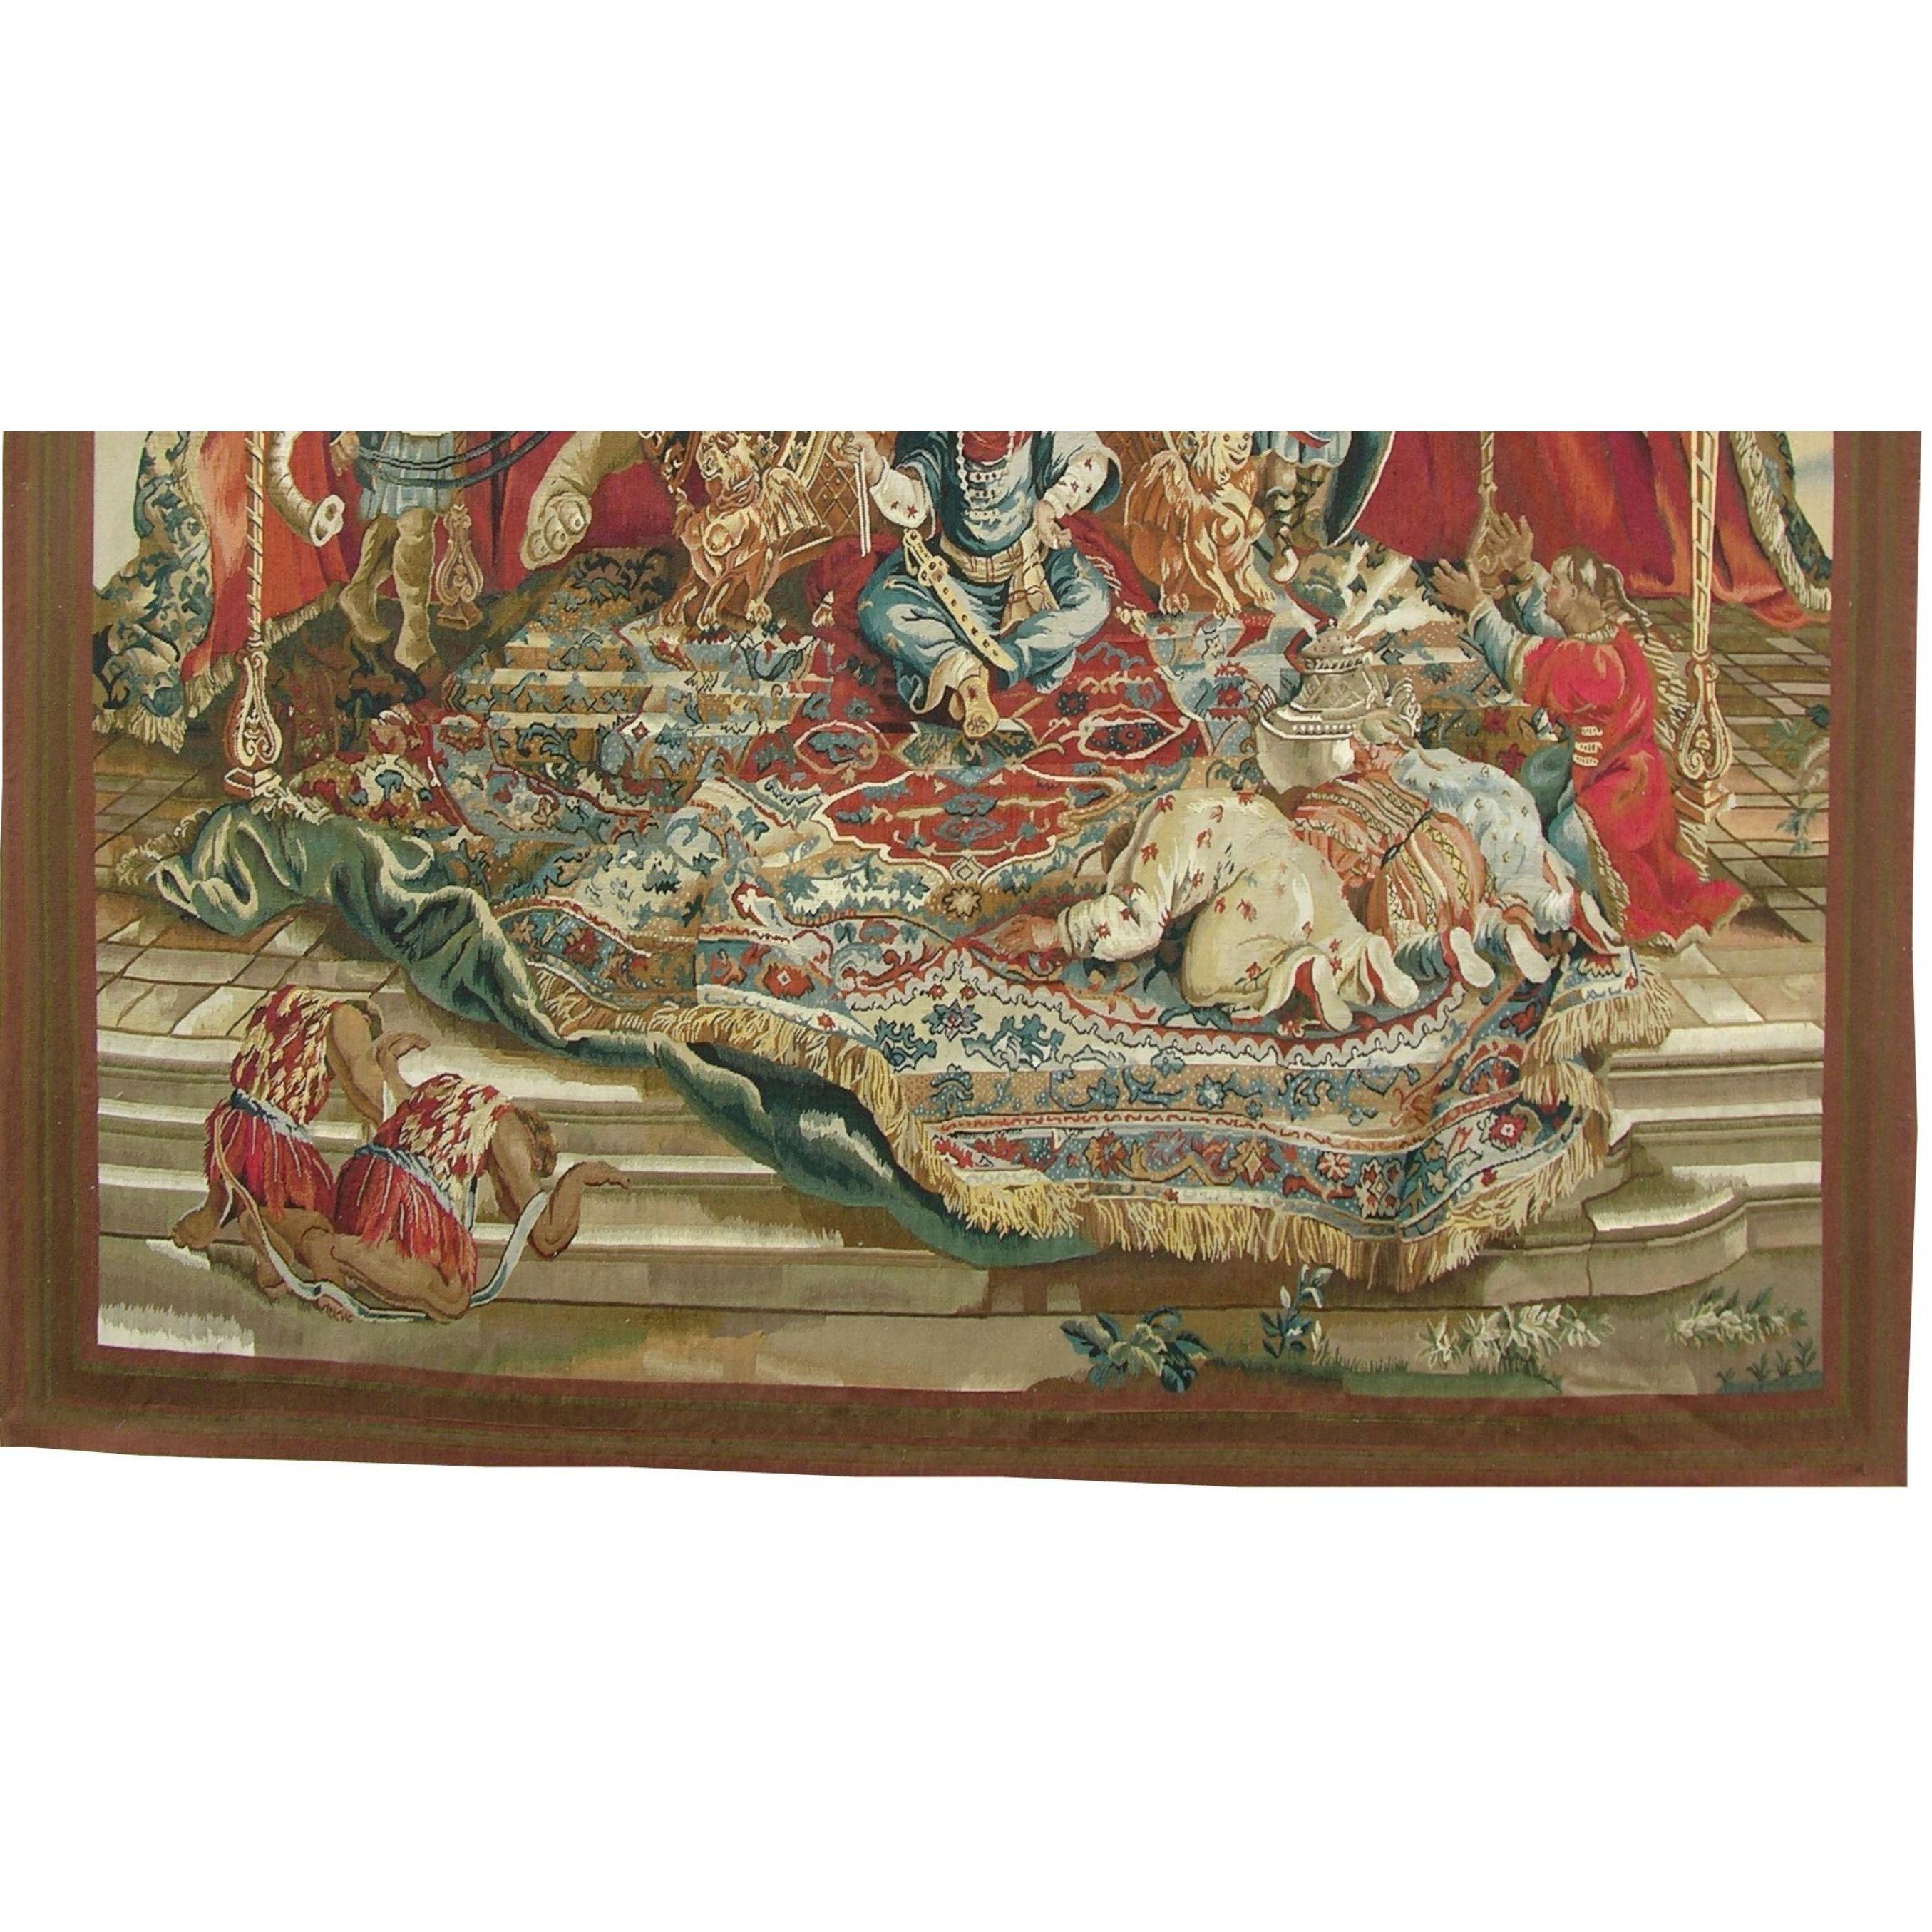 Authentic Decorative French Tapestry Wall Hanging 7'9'' X 6'9'' In Excellent Condition For Sale In Los Angeles, US